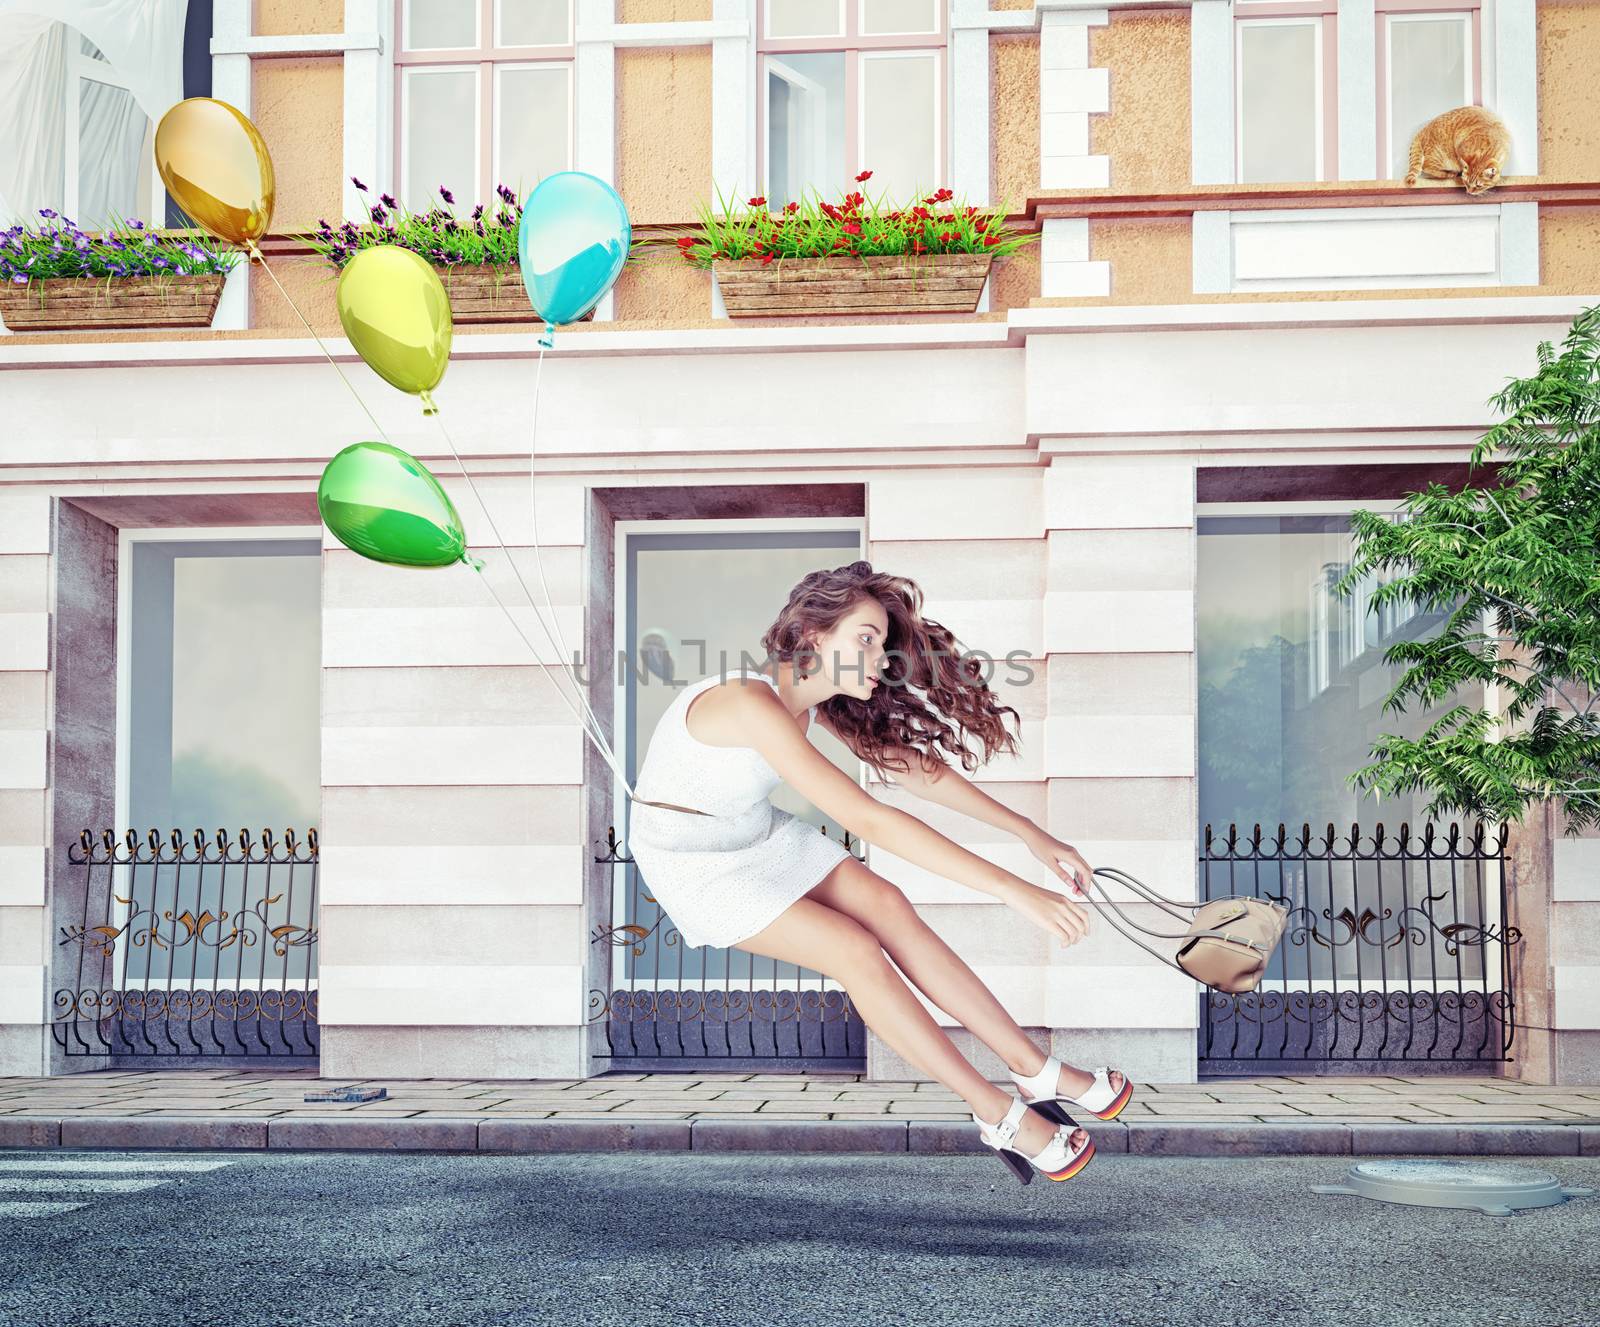 Balloons fly with young beautiful girl. Creative concept